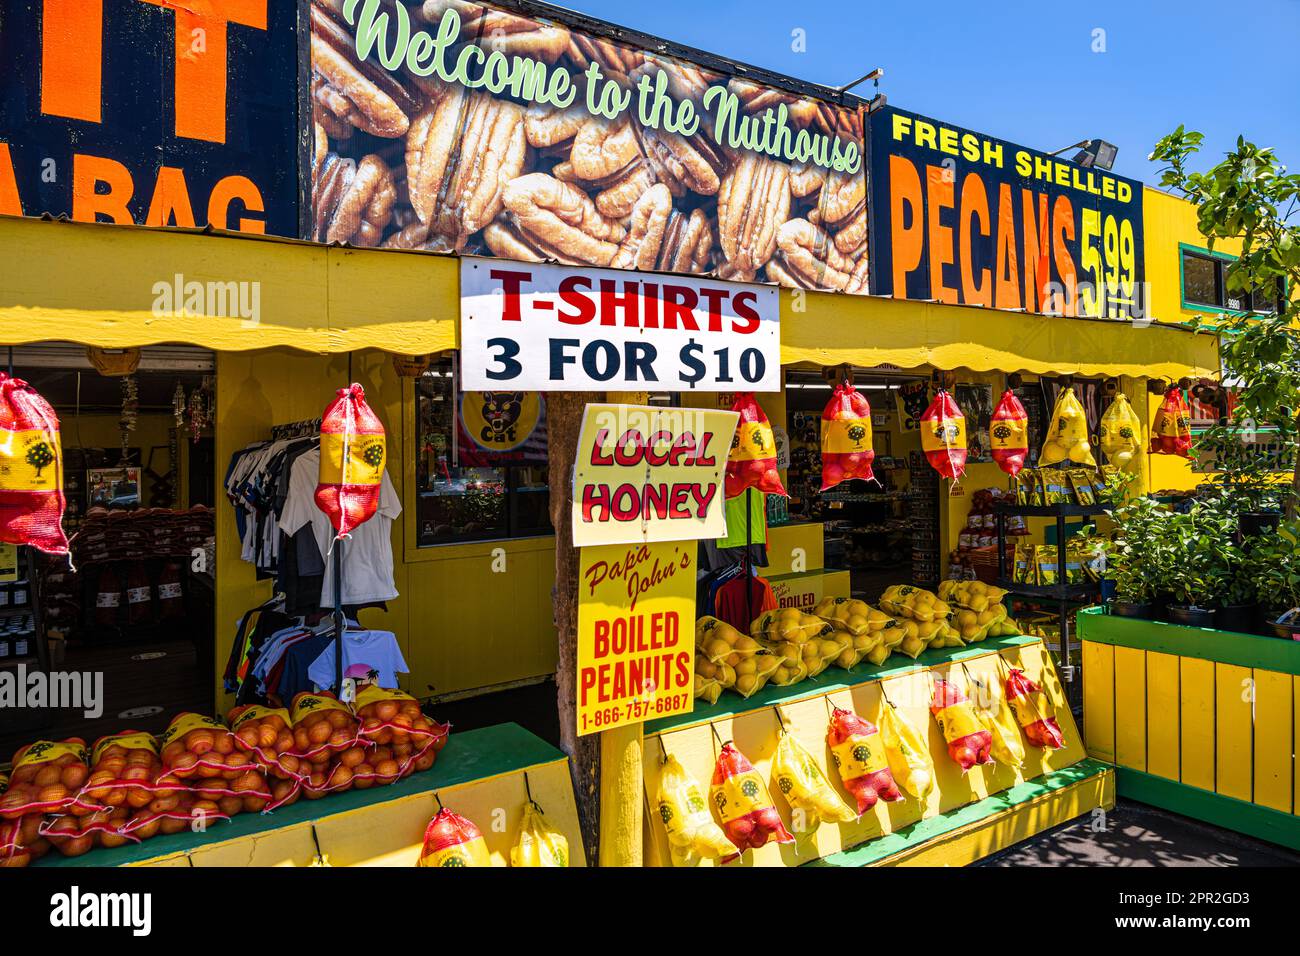 Florida tourist trap featuring Indian River Citrus, fresh pecans, gator jerky, fireworks and souvenirs along I-95 and U.S. 1 in St. Augustine, FL. Stock Photo